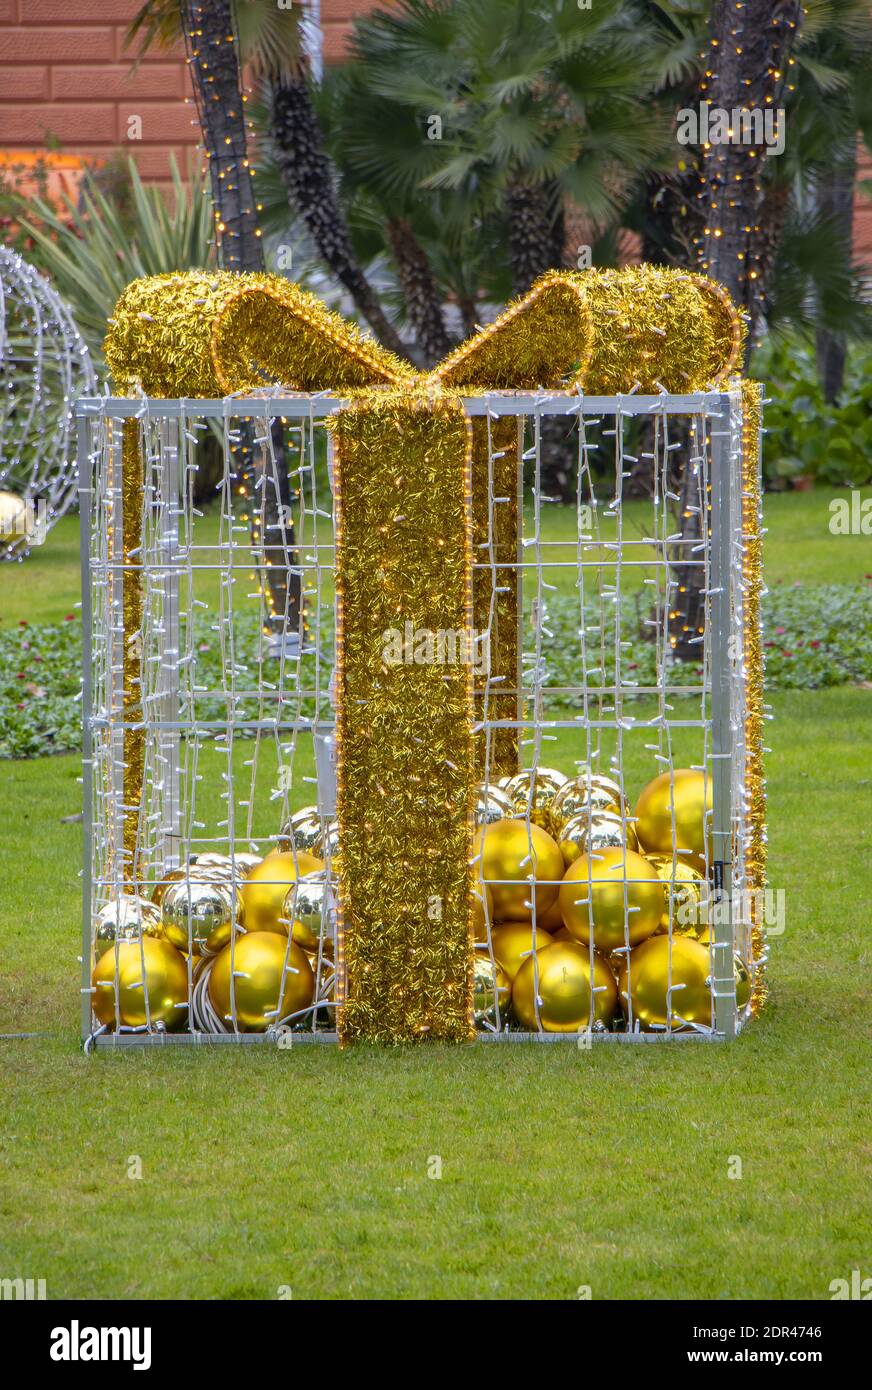 Christmas gift boxes with ball in a city park Stock Photo